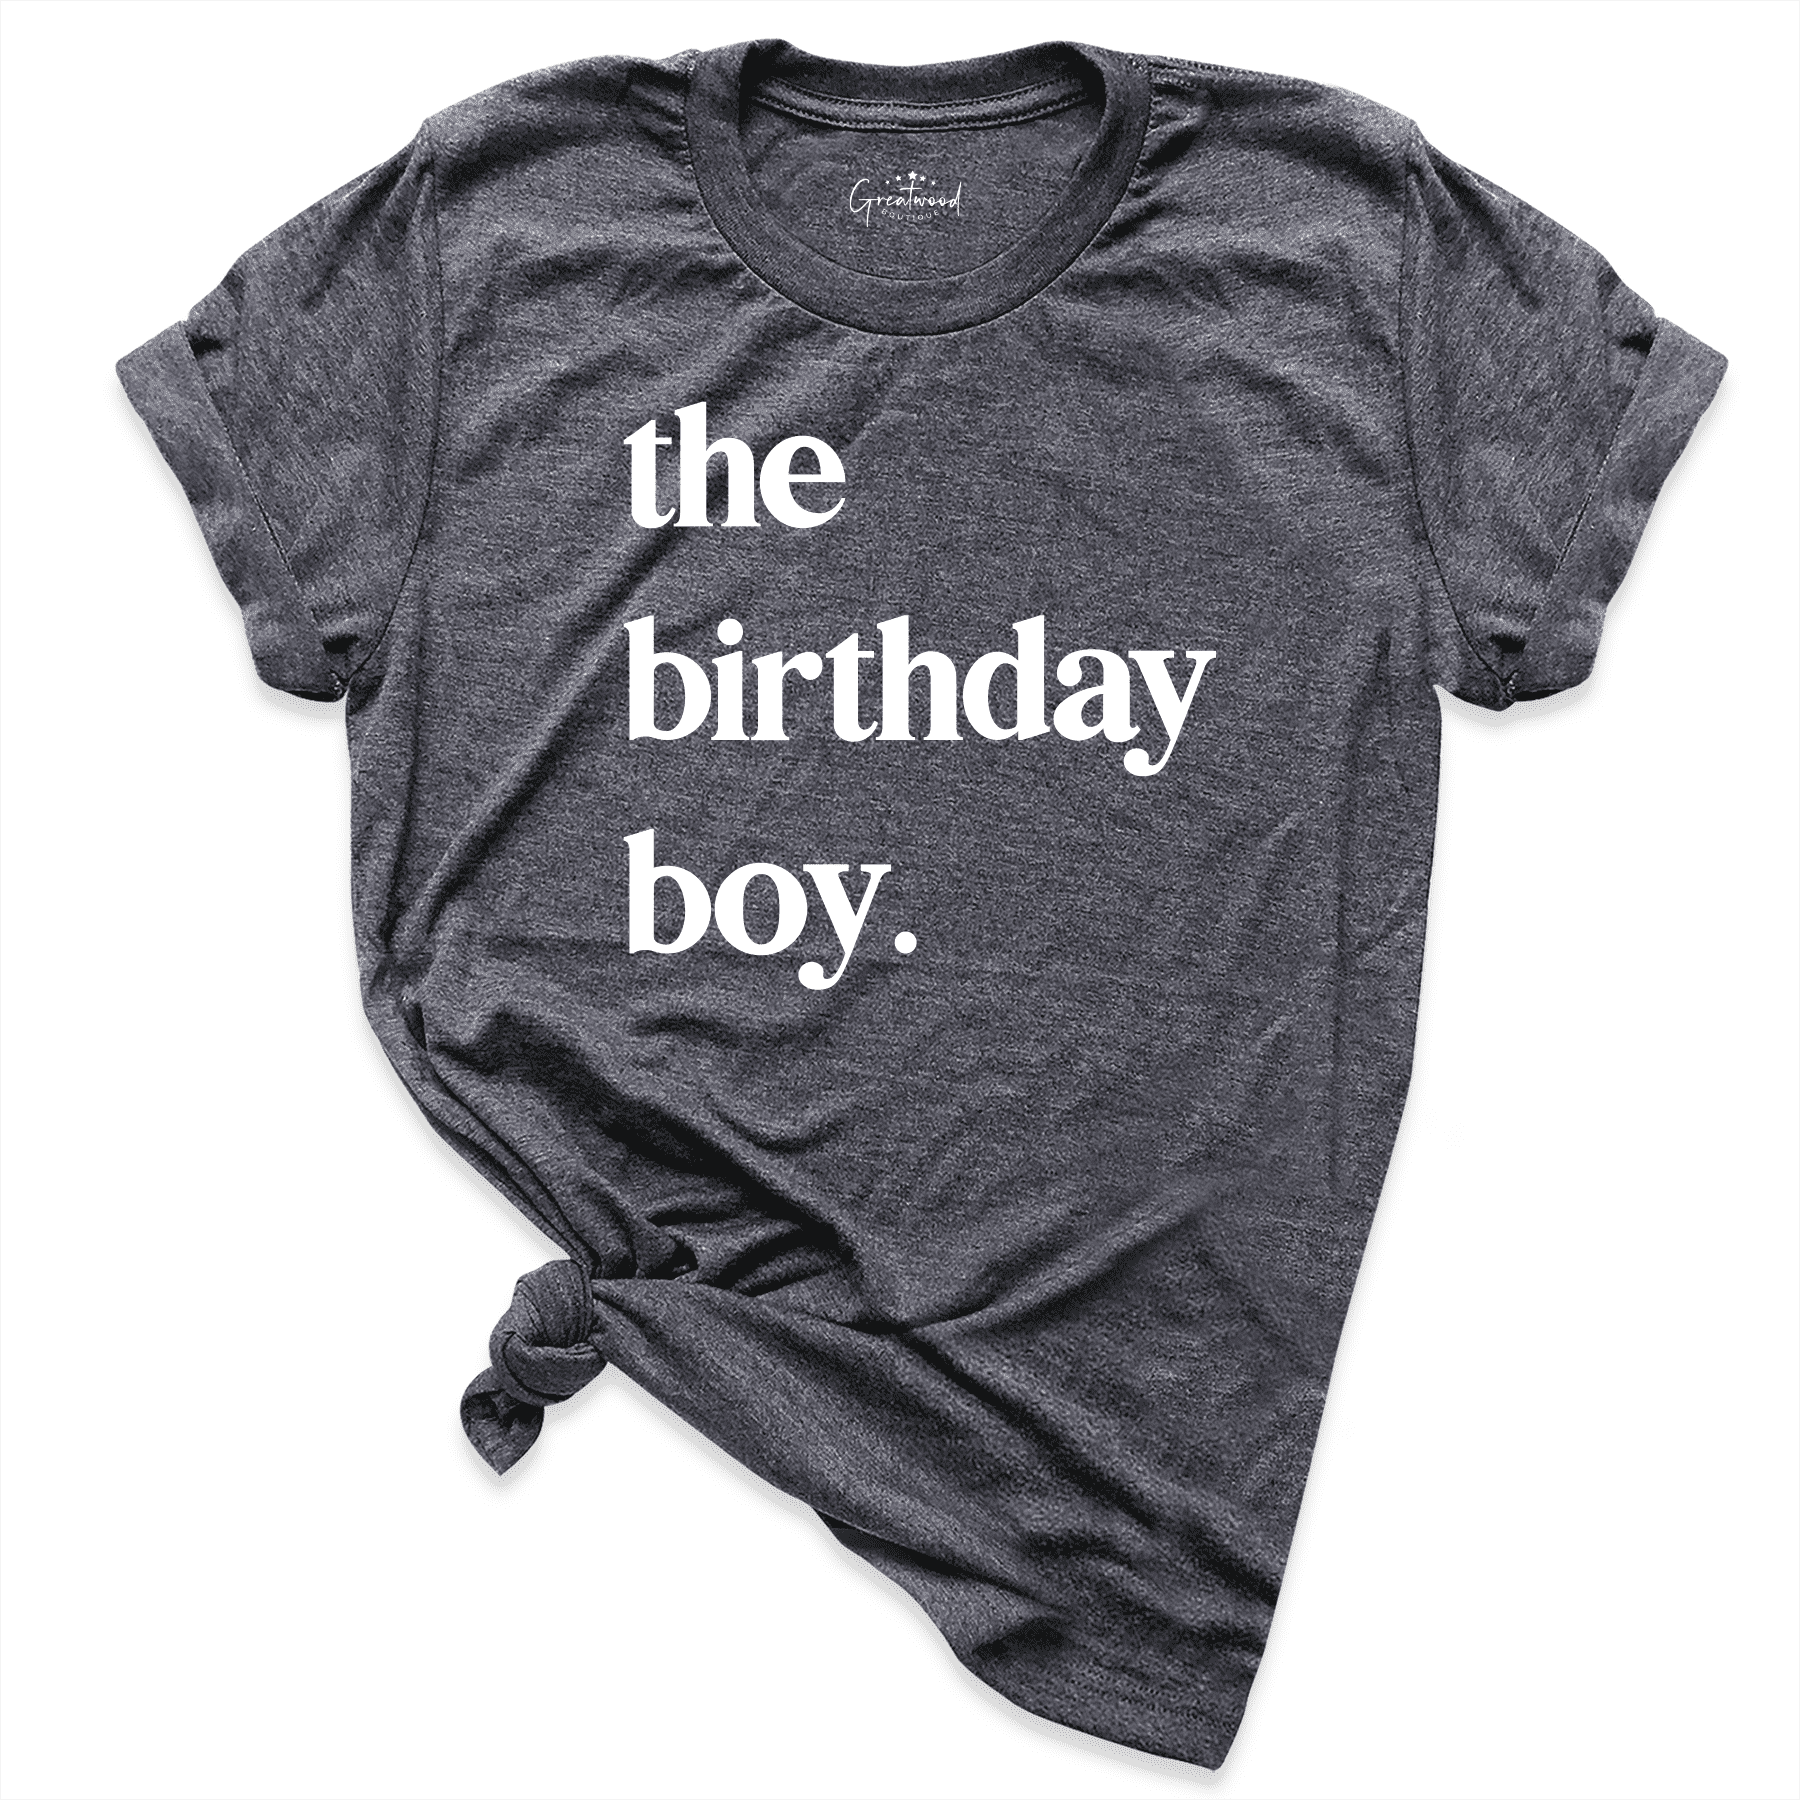 The Birthday Boy Shirt D.Grey - Greatwood Boutique